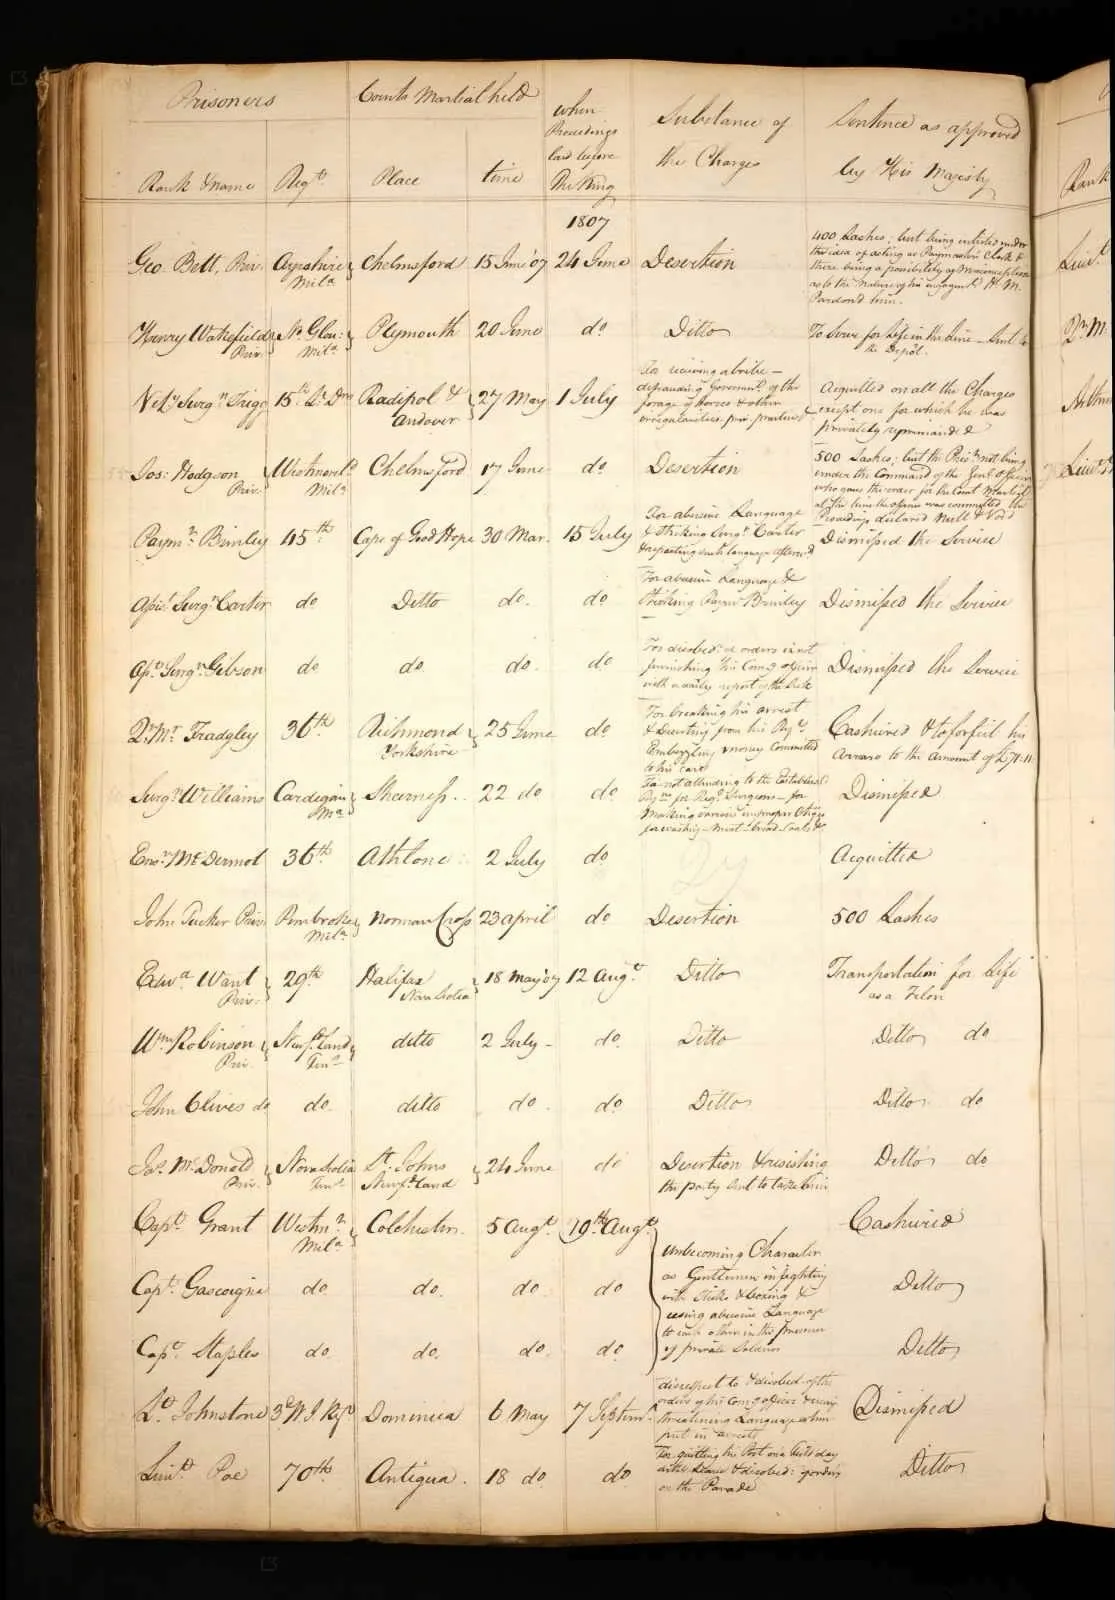 This page from a British Army court martial record dates from 1807 and can be found on Fold3.com